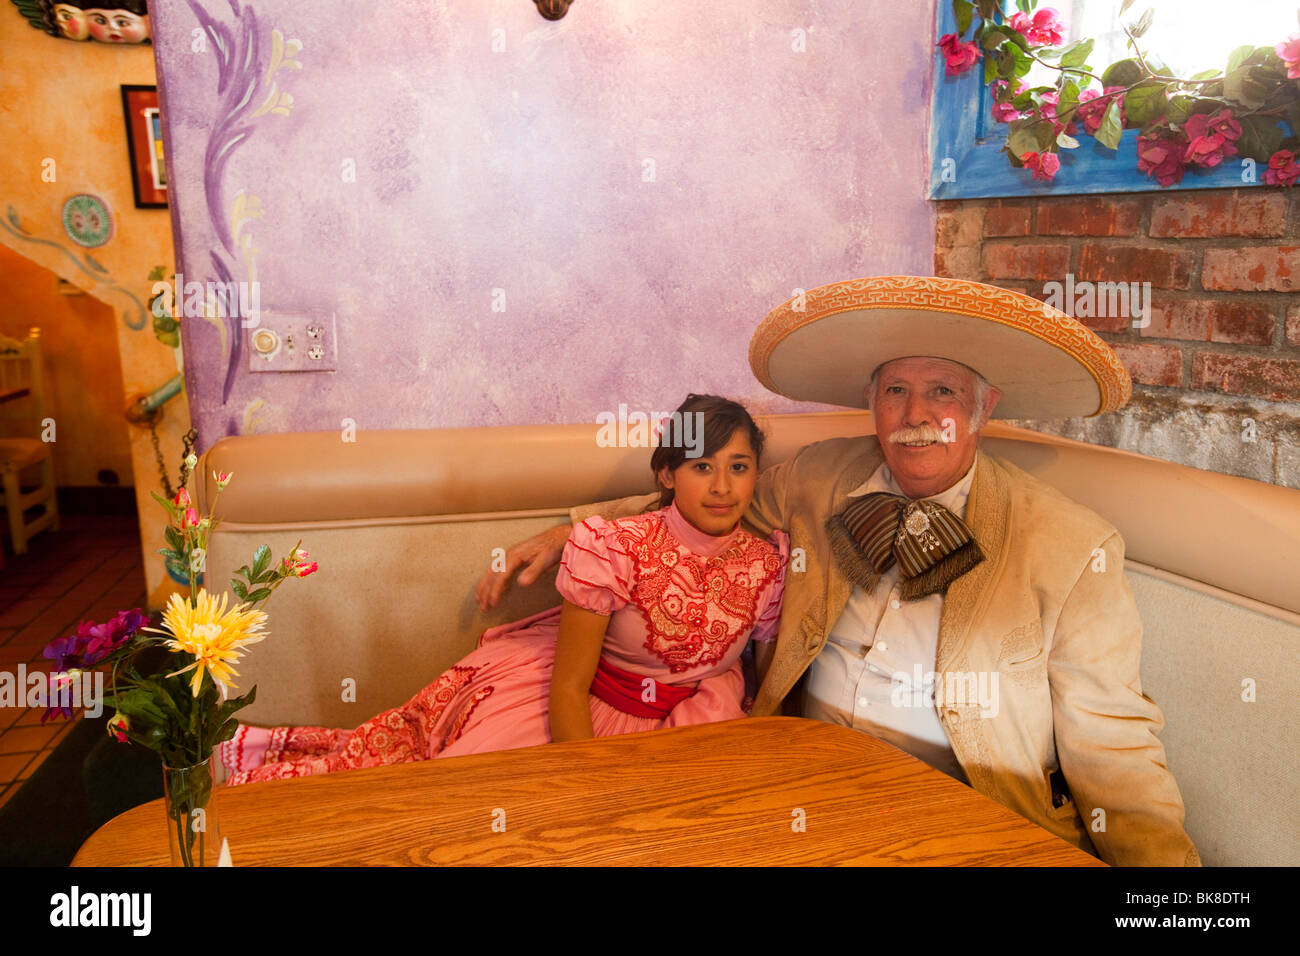 Traditional Mexican Dress, Las Anitas restaurant, Olvera Street, Downtown Los Angeles, California, United States of America Stock Photo